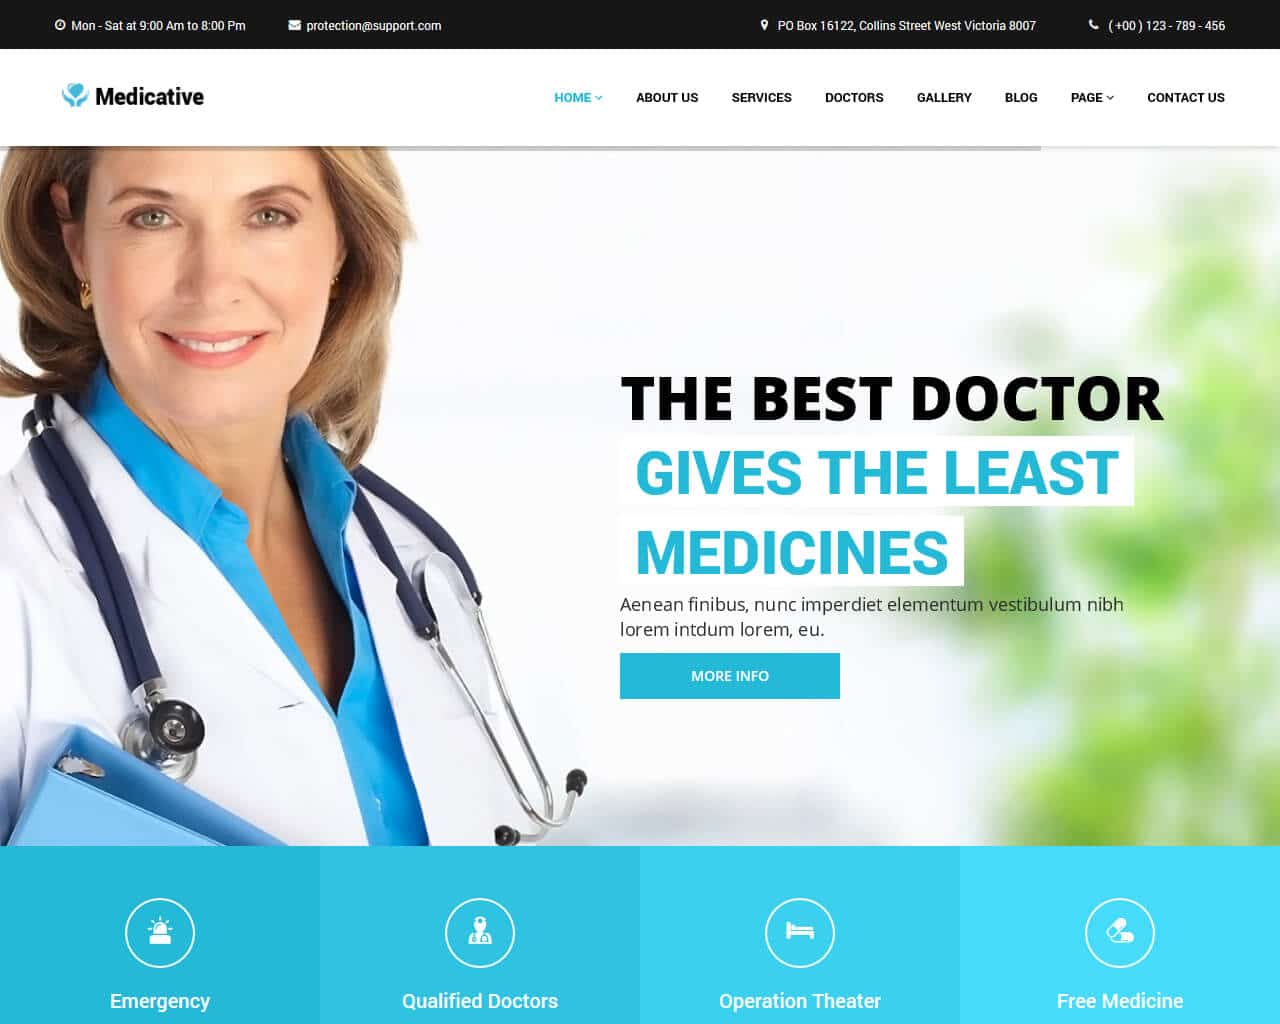 20+ Best Medical, Hospital and Clinic Website Templates 2019